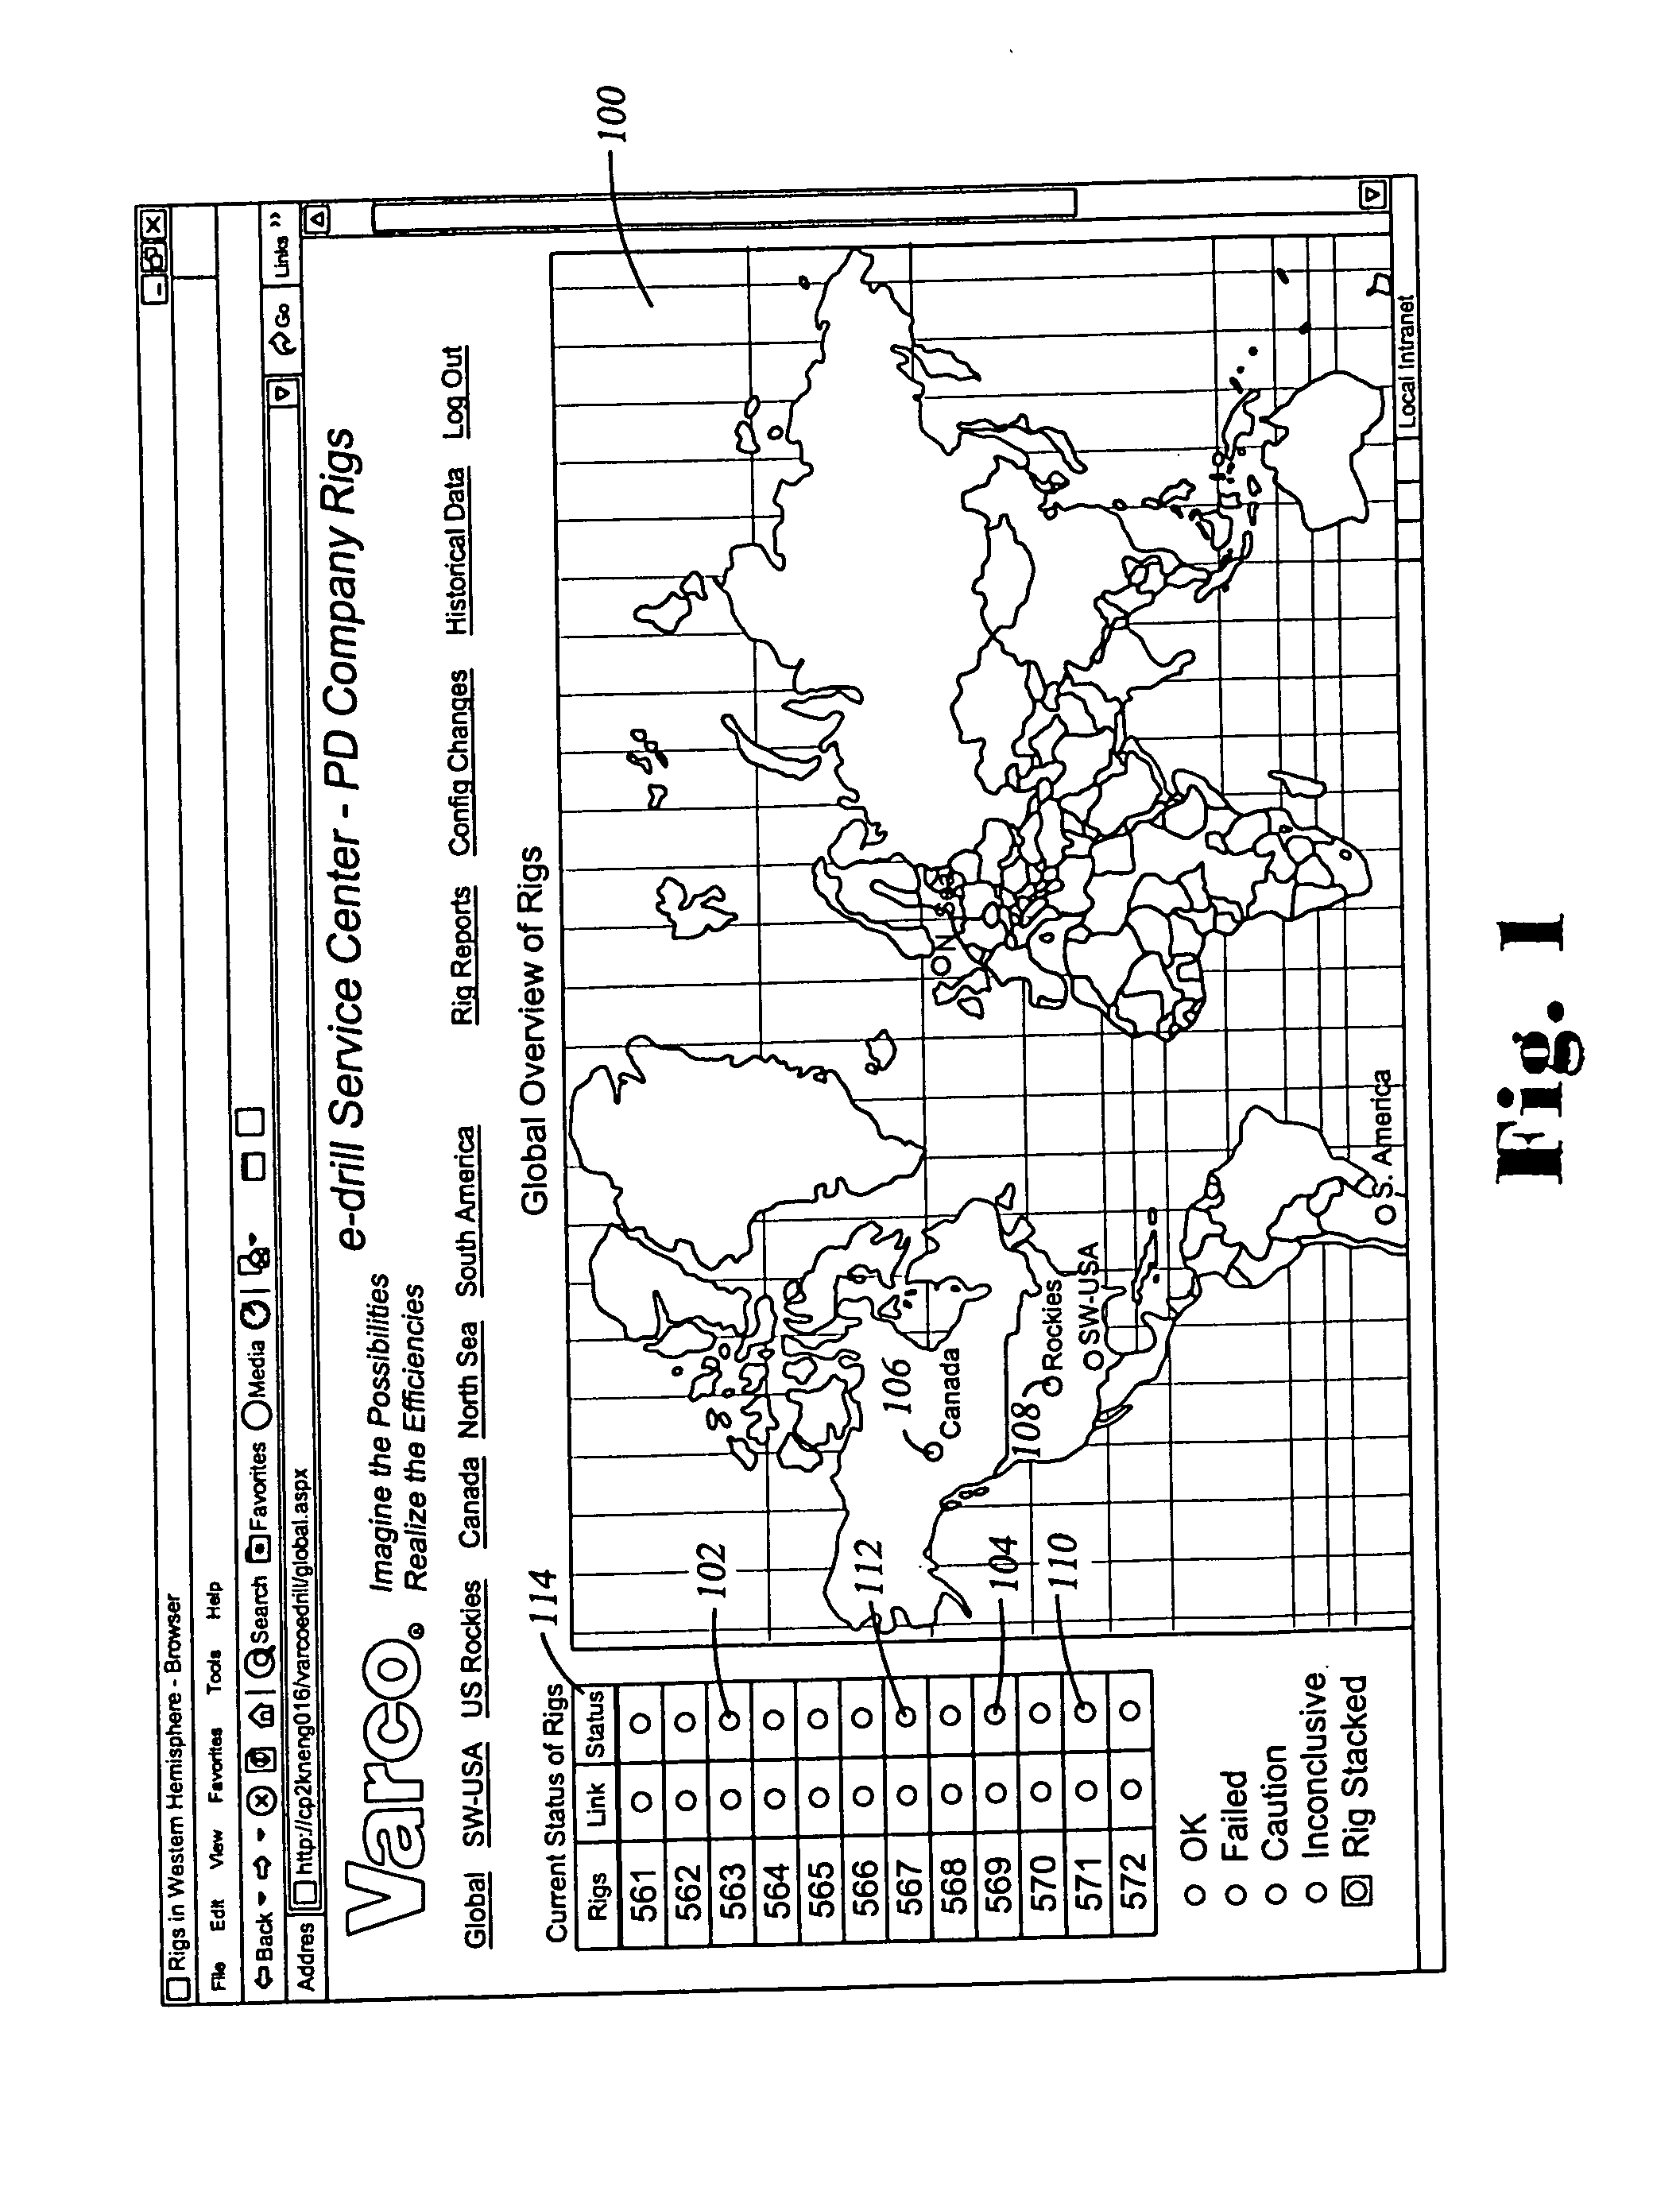 Oil rig choke control systems and methods